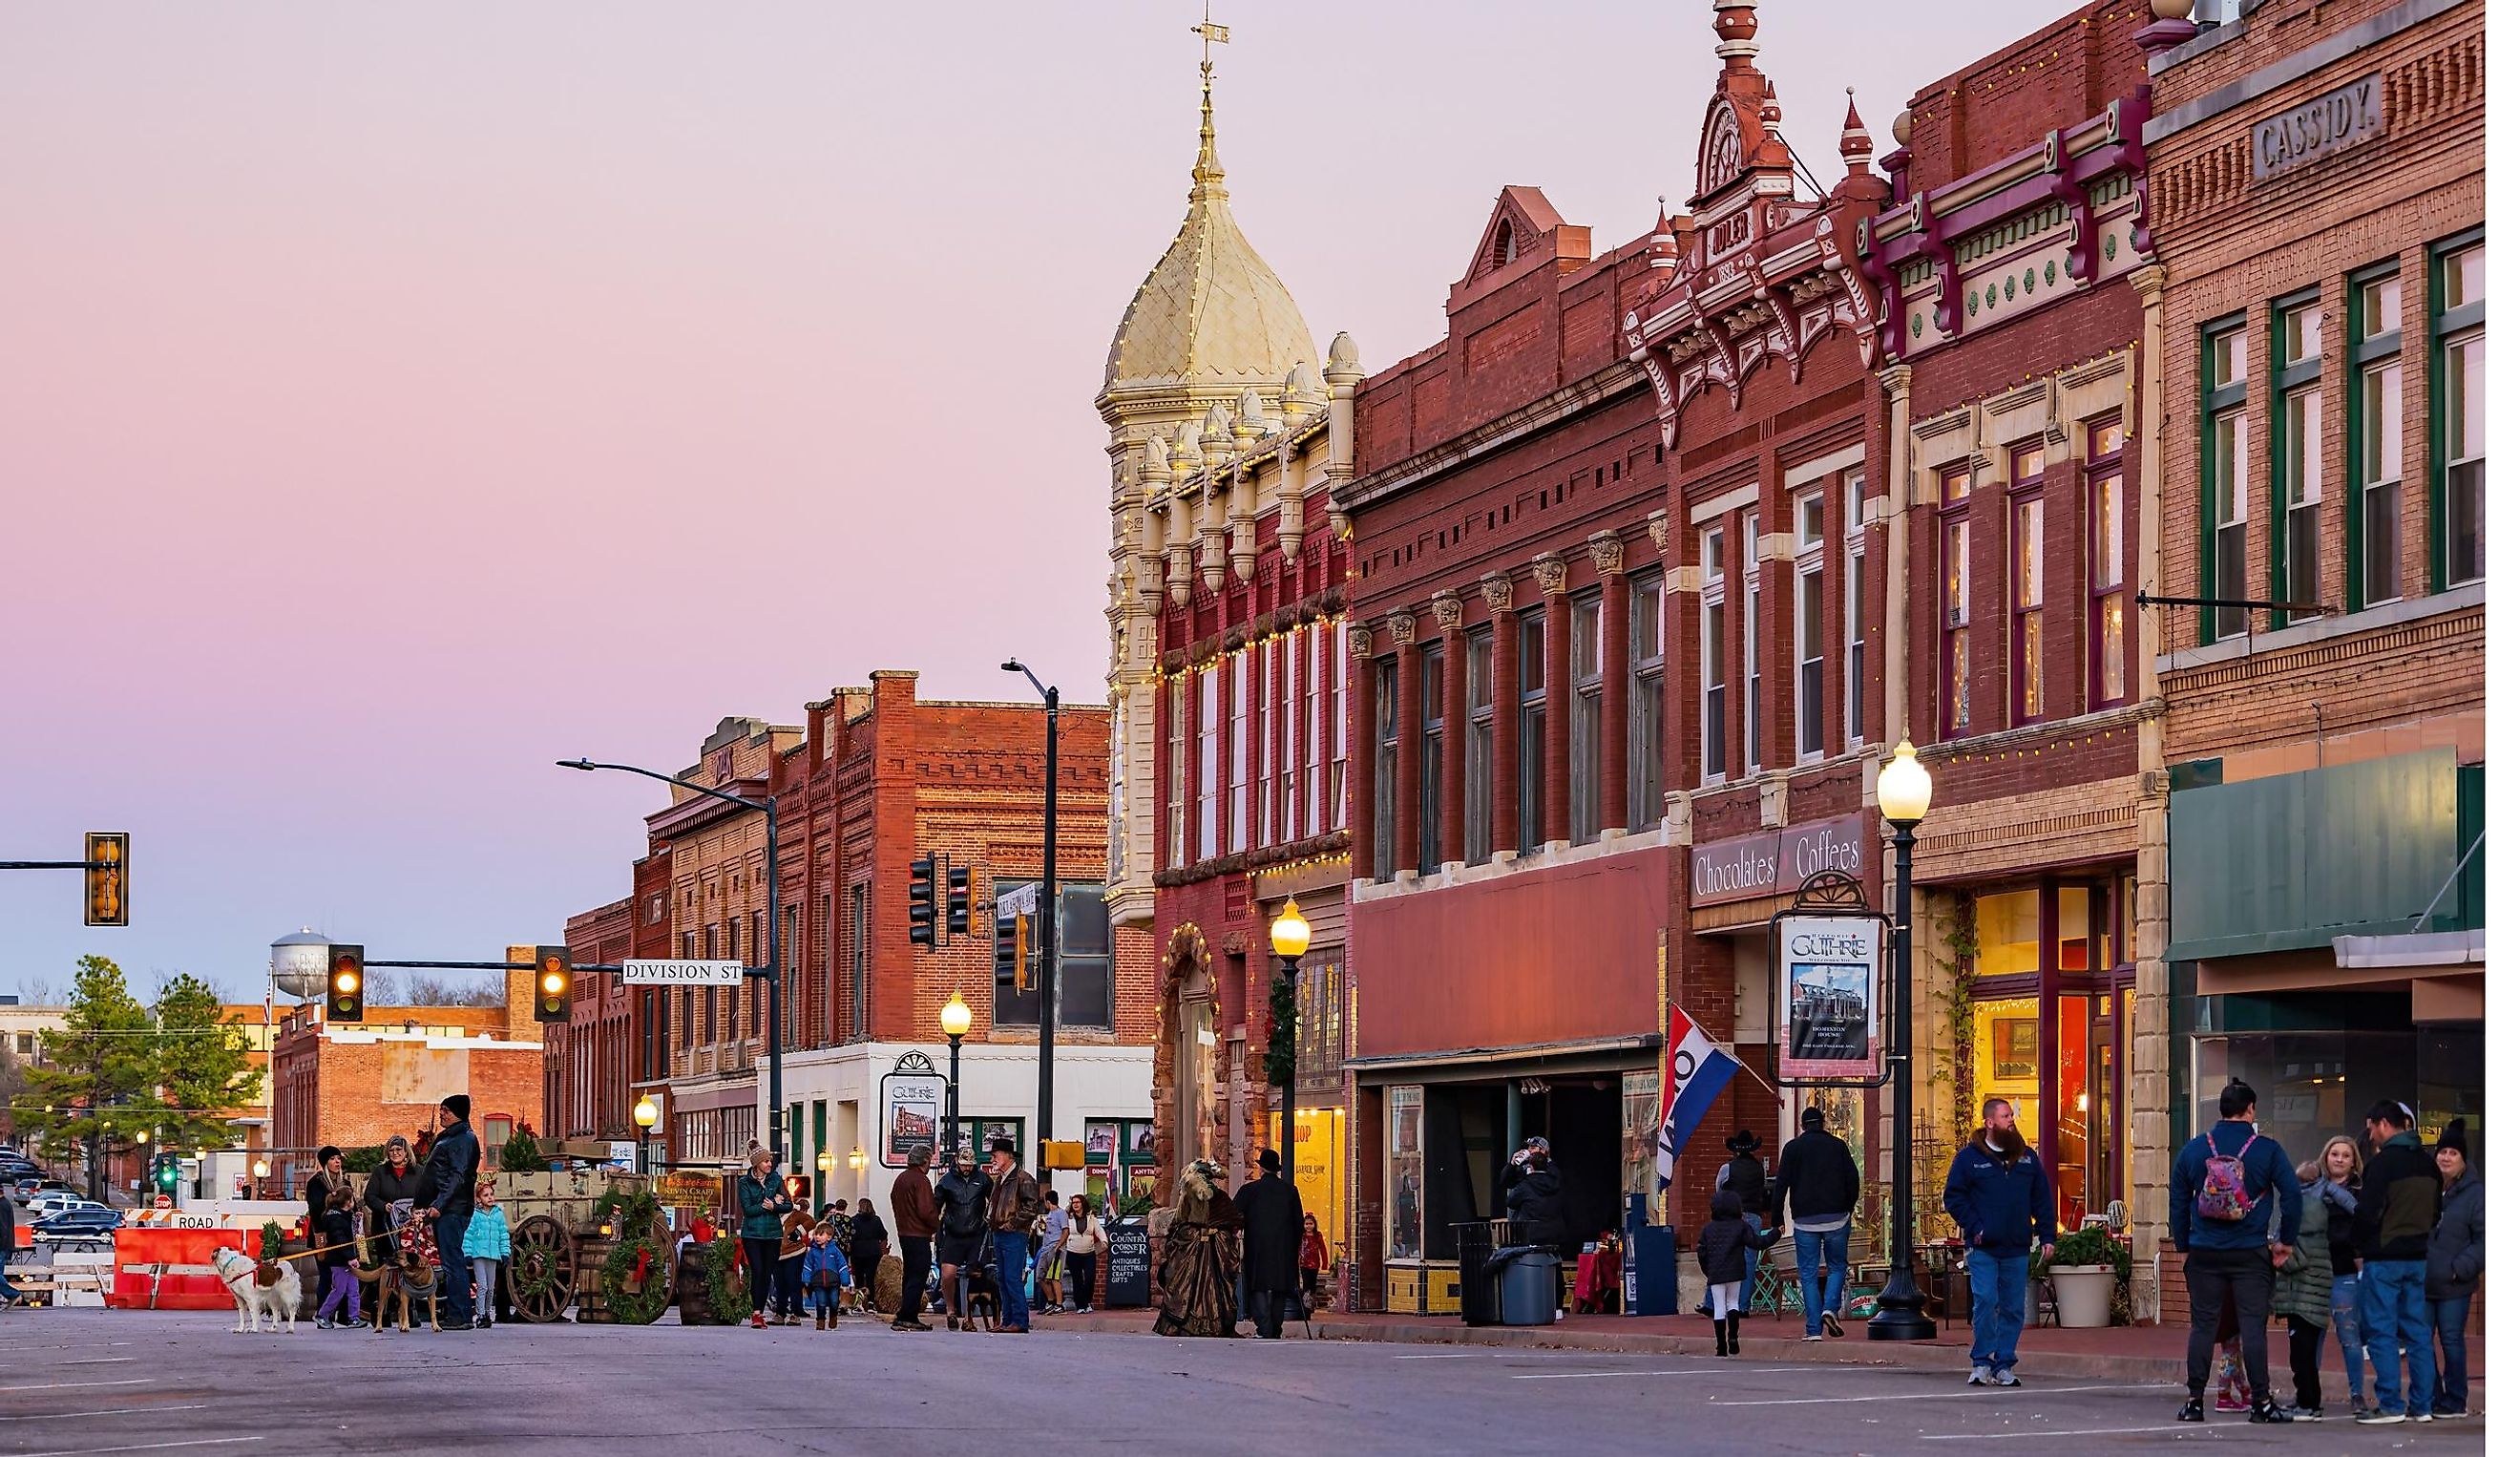 Night view of the historical building in Guthrie